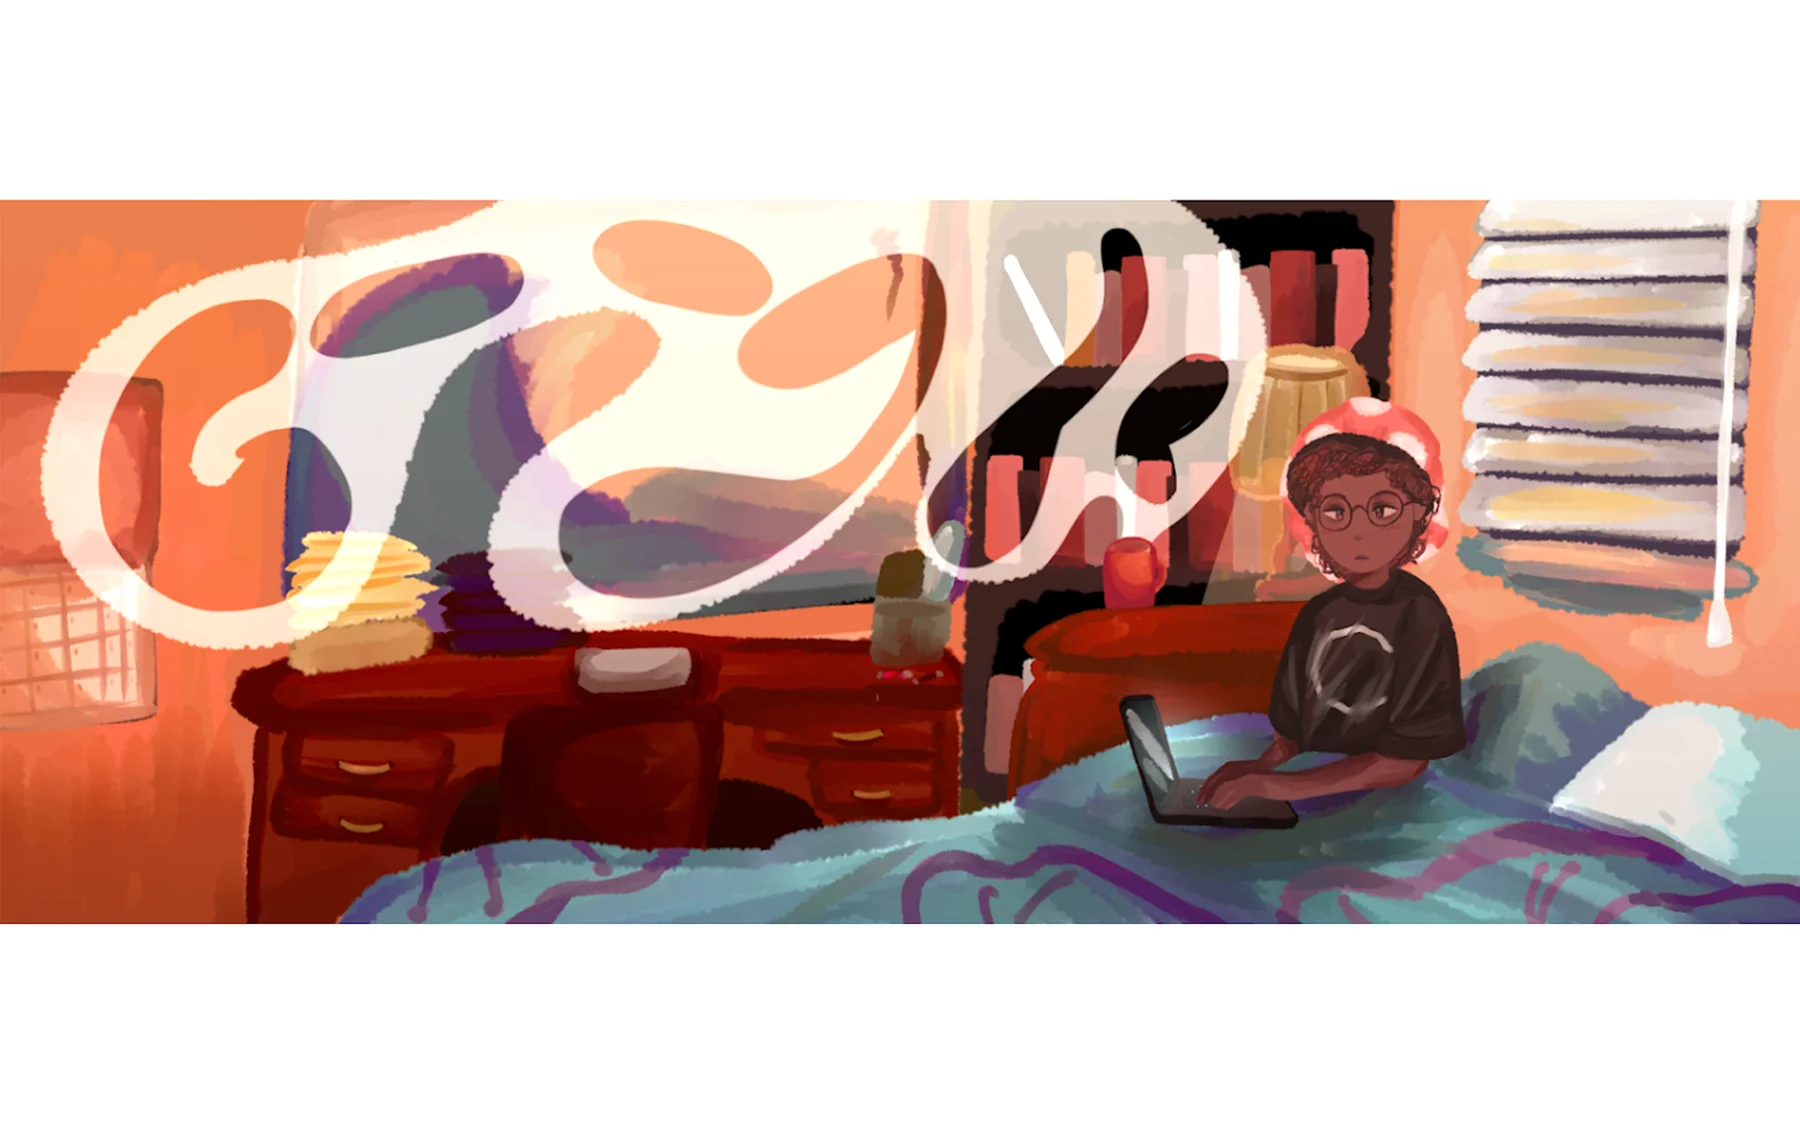 Illustration of a girl sitting in bed on her laptop with a GOOGLE logo formed from steam billowing out of a mug hanging above. The girl has brown skin, brown hair wrapped up, and eyeglasses. The background is a bedroom with a desk, bookshelf, and window.